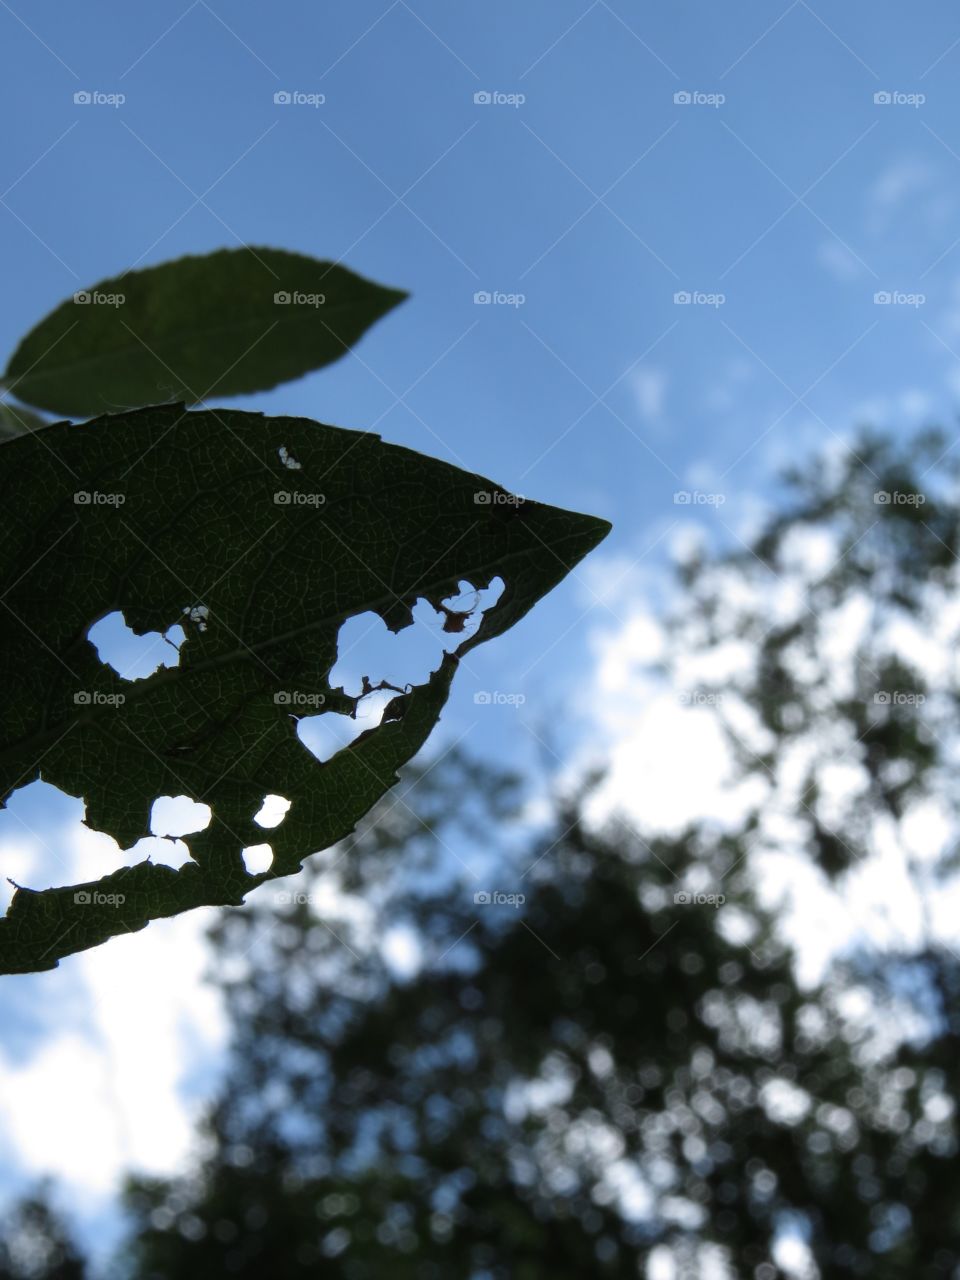 A leaf with holes